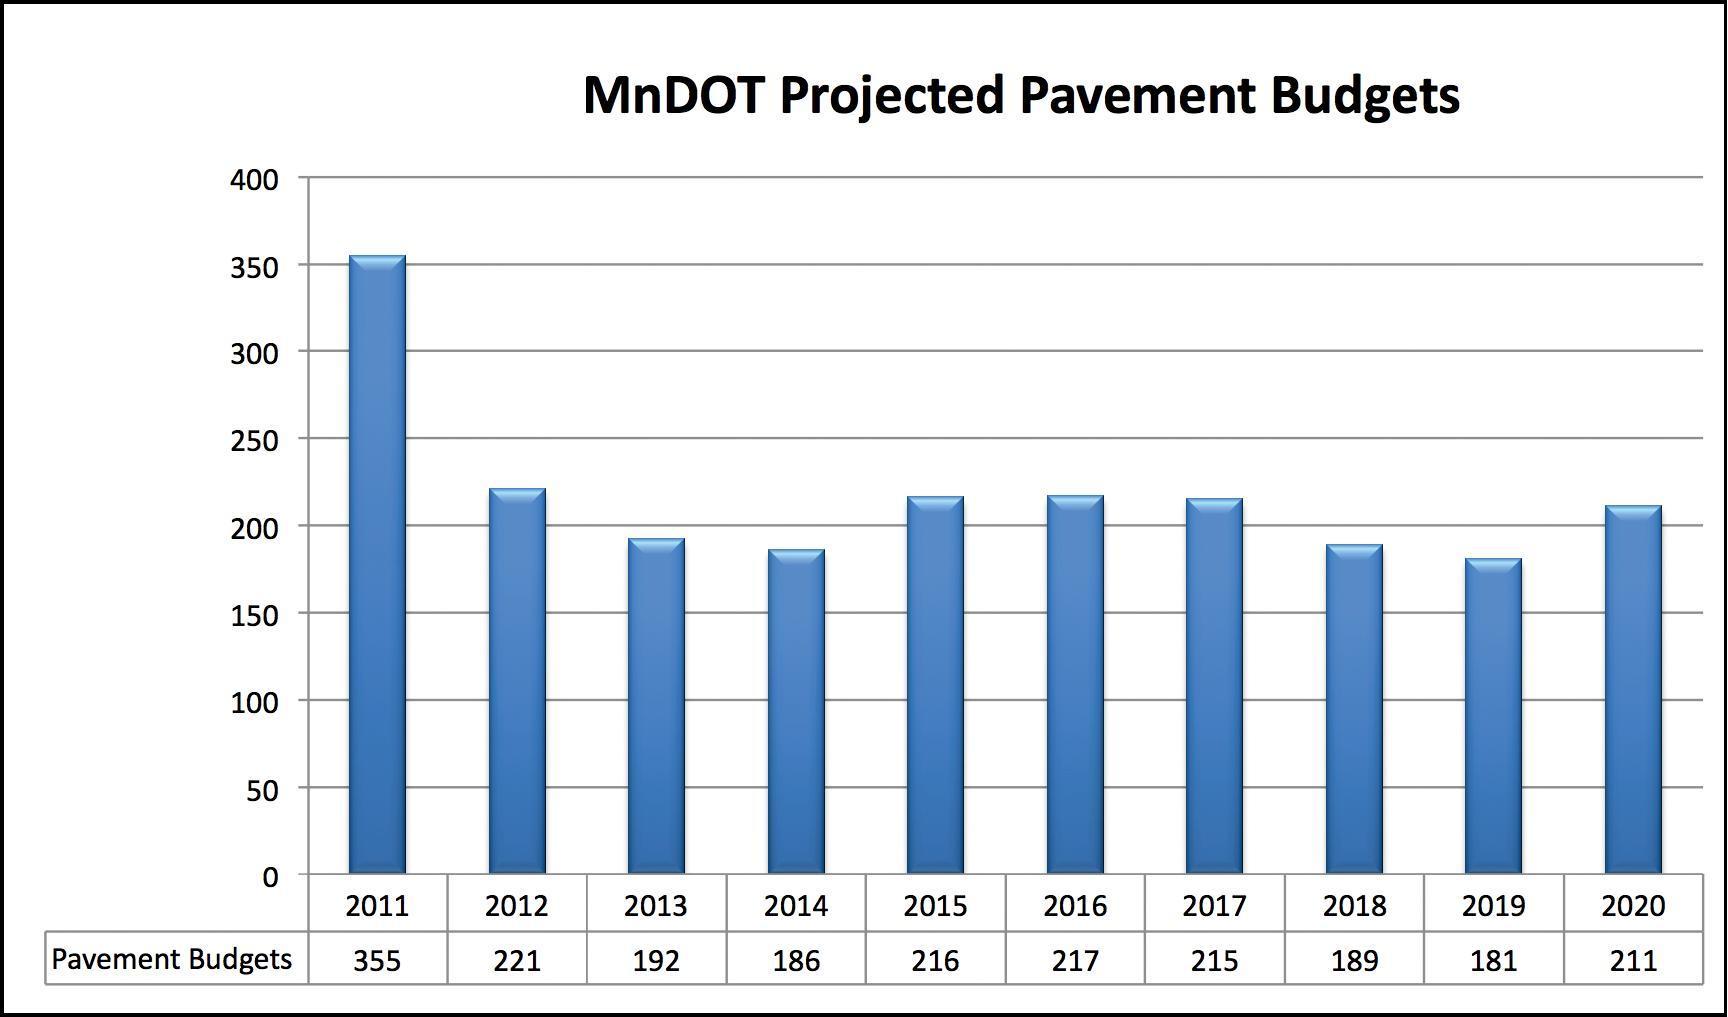 Figure 33 elaborates upon Figure 32 by focusing upon expenditures for pavements in Minnesota forecast from 2011 to 2020.  The expenditures are at their peak in 2011 at 355 million, and then decline rapidly to 221 million in 2021.  Forecasted expenditures vary with a low of 186 million dollars in 2014 and rising slightly to 211 million dollars by 2020.  The overall trend is for a decline in pavement expenditures by more than one third between 2011 and 2020.